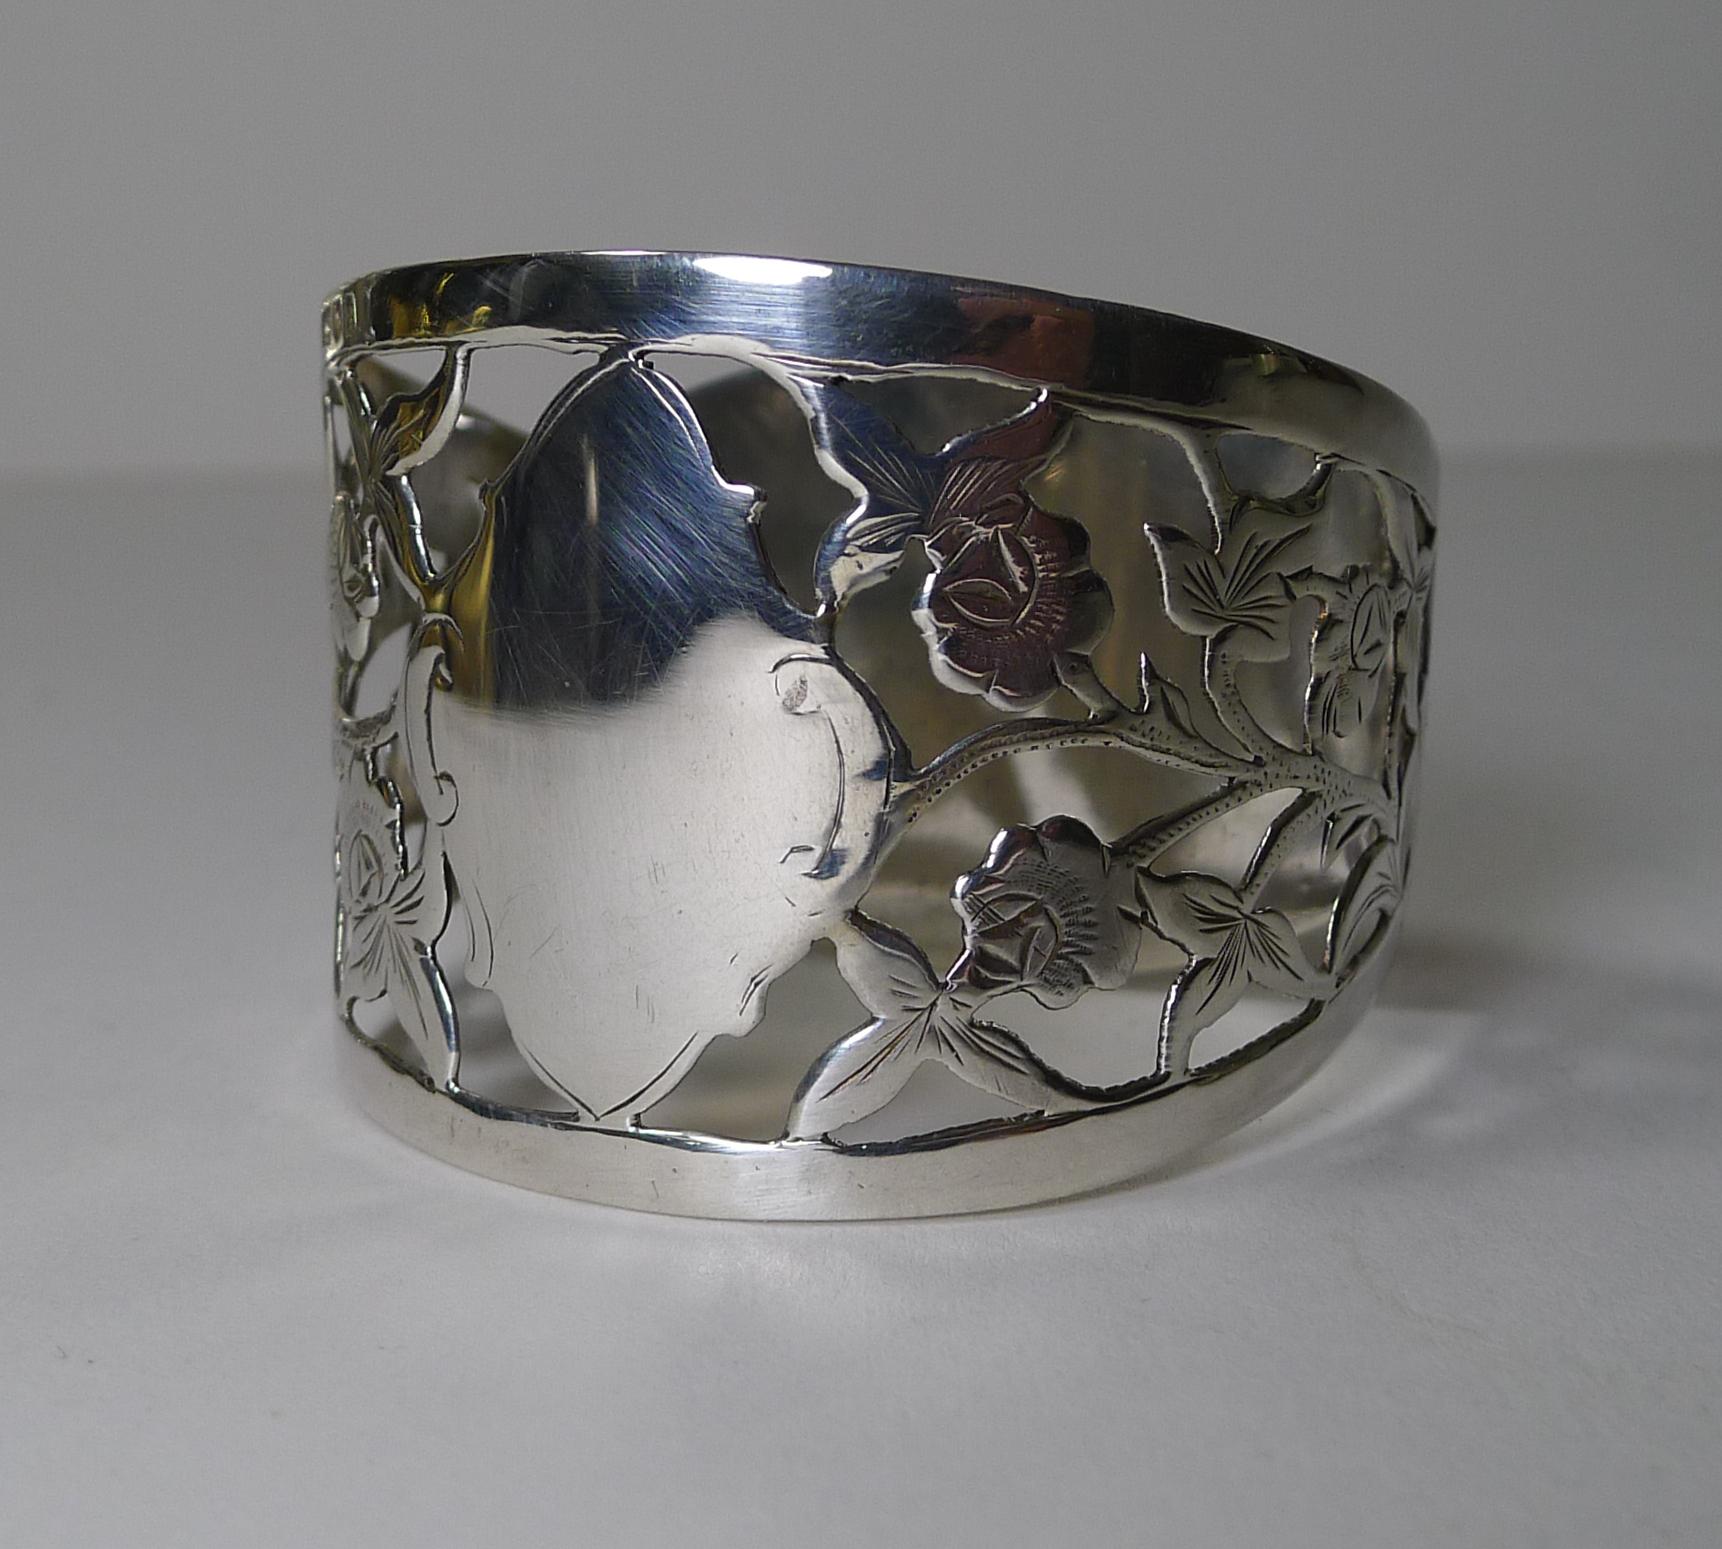 European Antique English Pierced Sterling Silver Napkin Ring, Roses